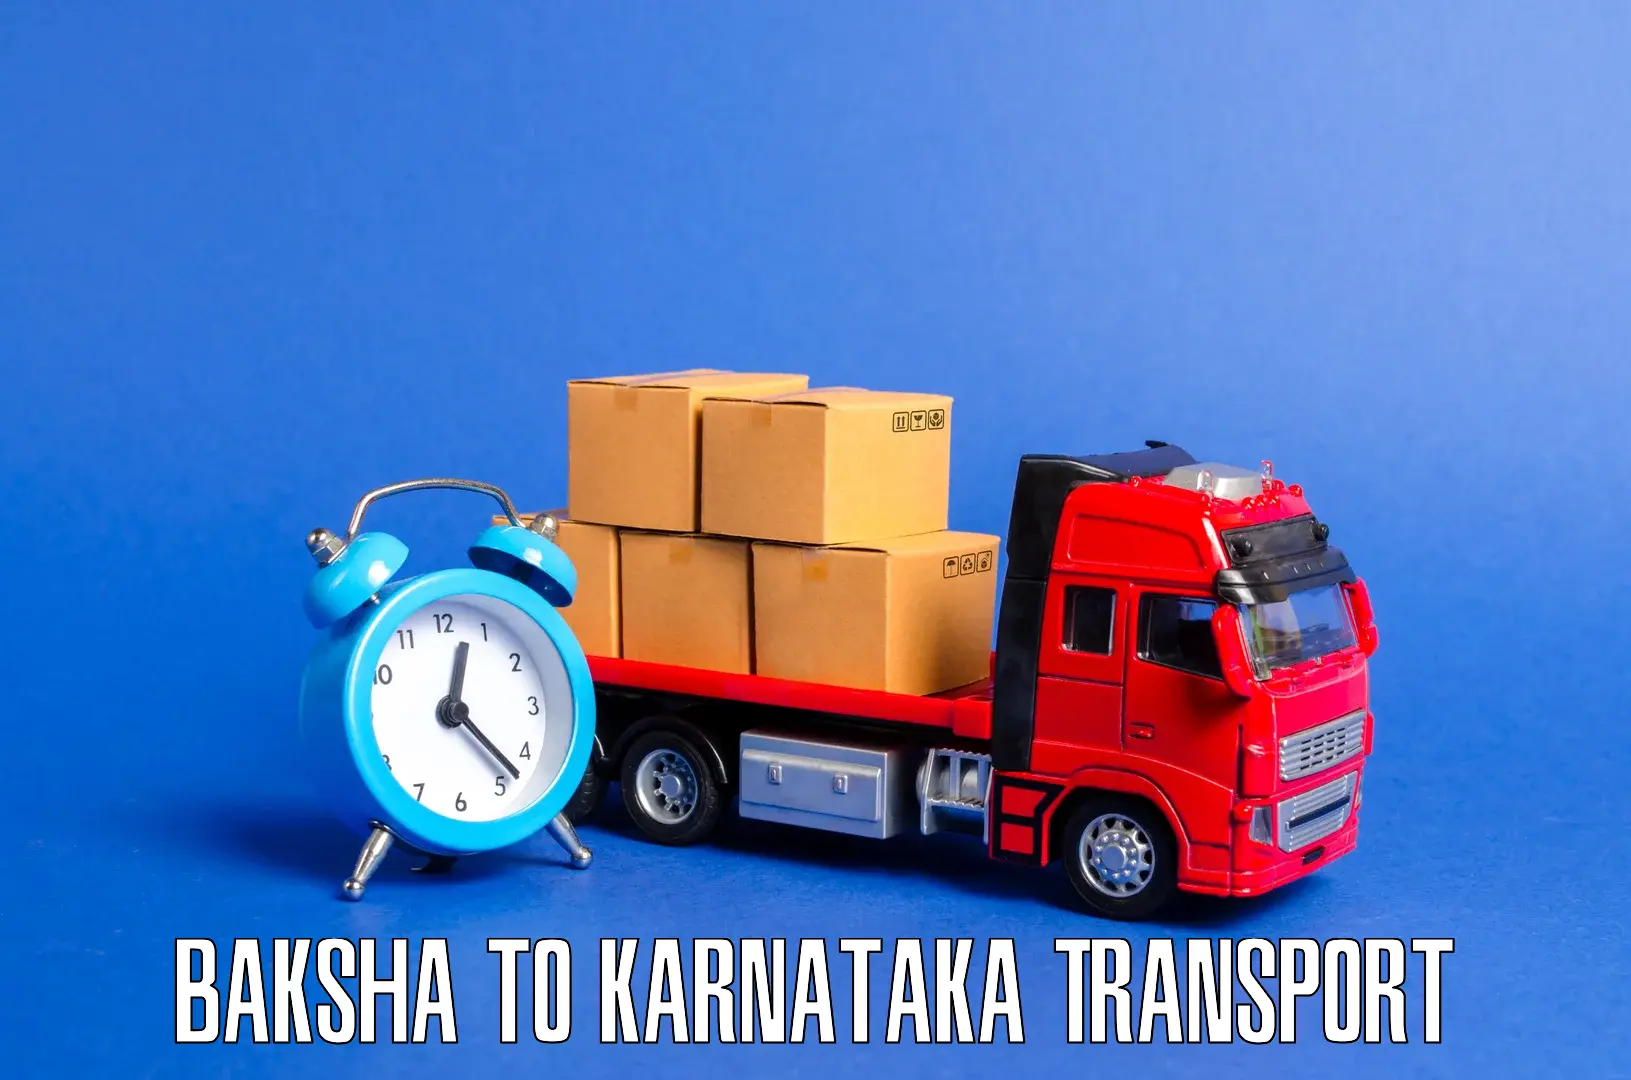 Interstate transport services Baksha to Manipal Academy of Higher Education